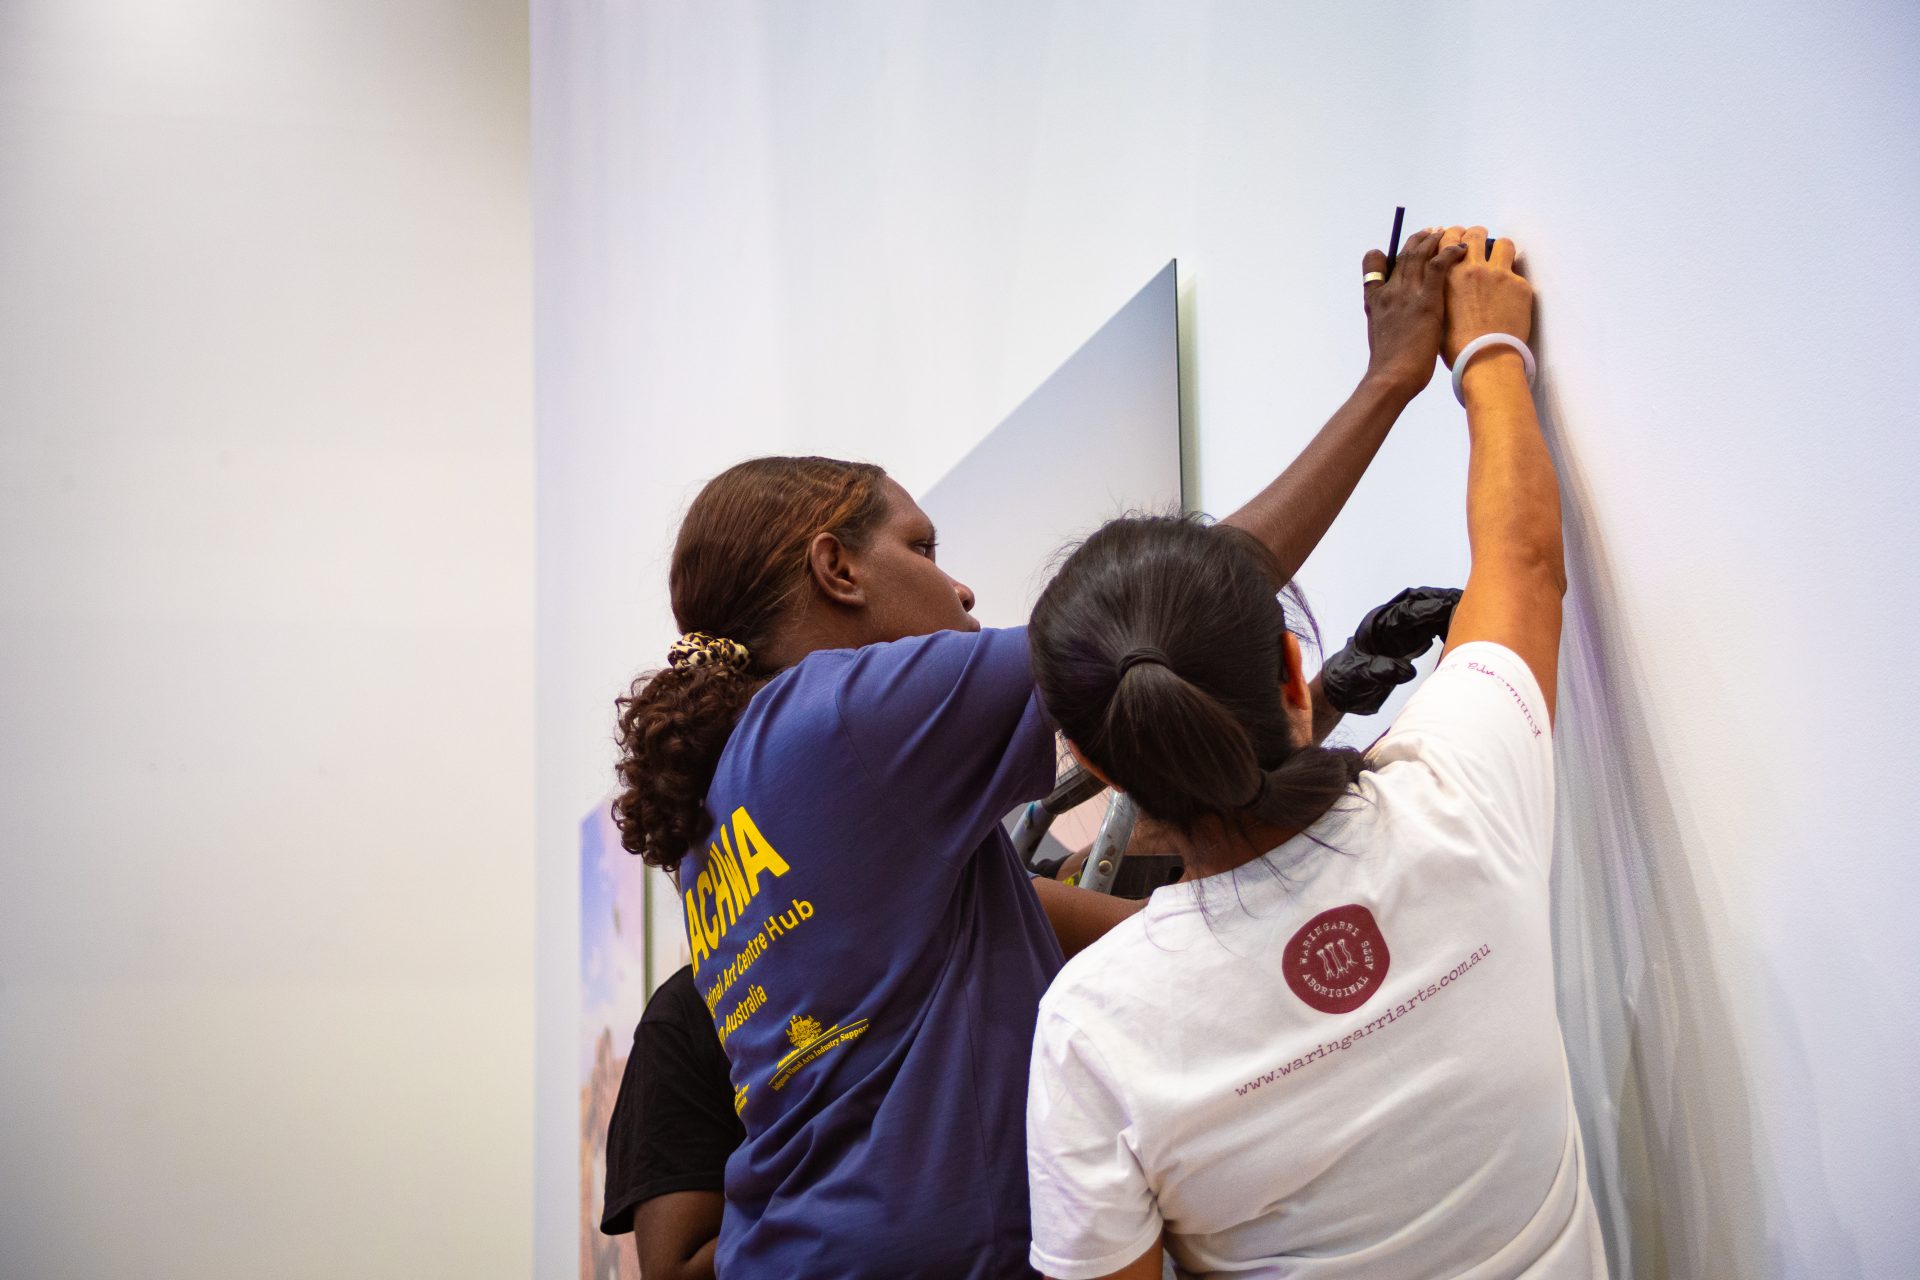 Jade Butler and Jacky Cheng working on installing artworks at the Martumili Gallery as part of Our Future: Aboriginal Arts Worker Training Program, Parnpajinya (Newman), 2023. Photograph by Jess Russell.